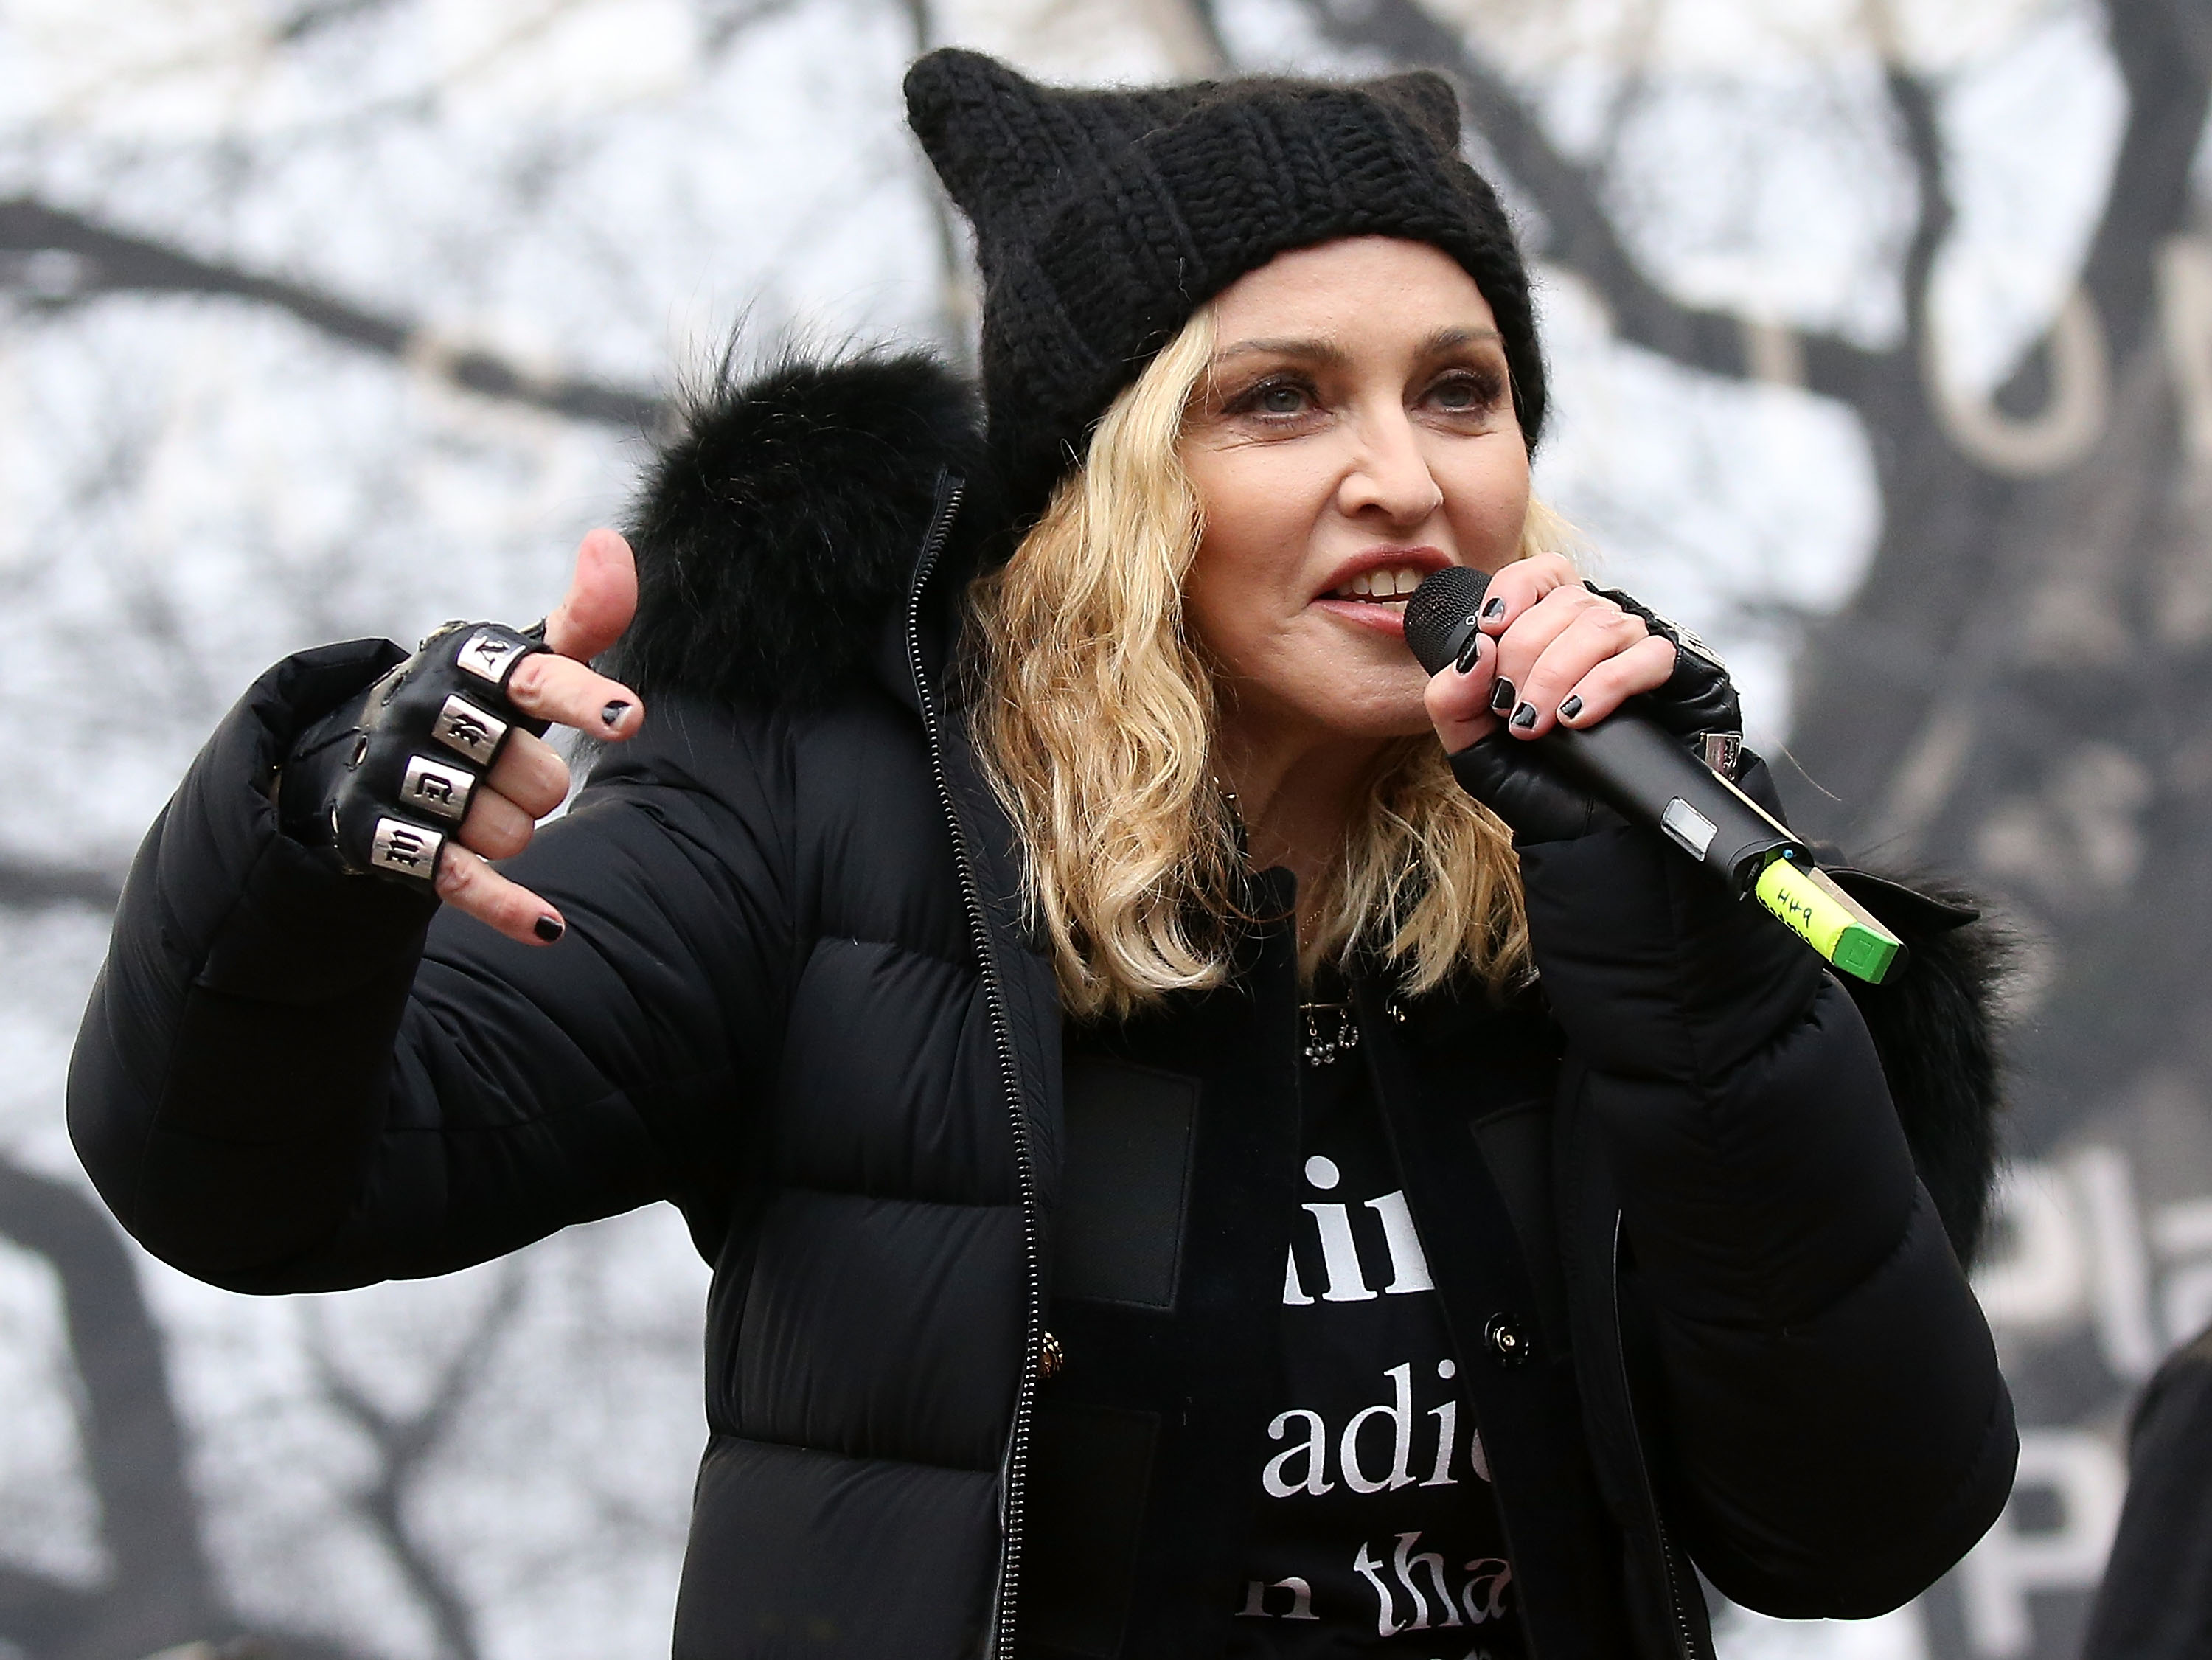 Madonna performs onstage during the Women's March on Washington on January 21, 2017 in Washington, DC. (Paul Morigi—WireImage)